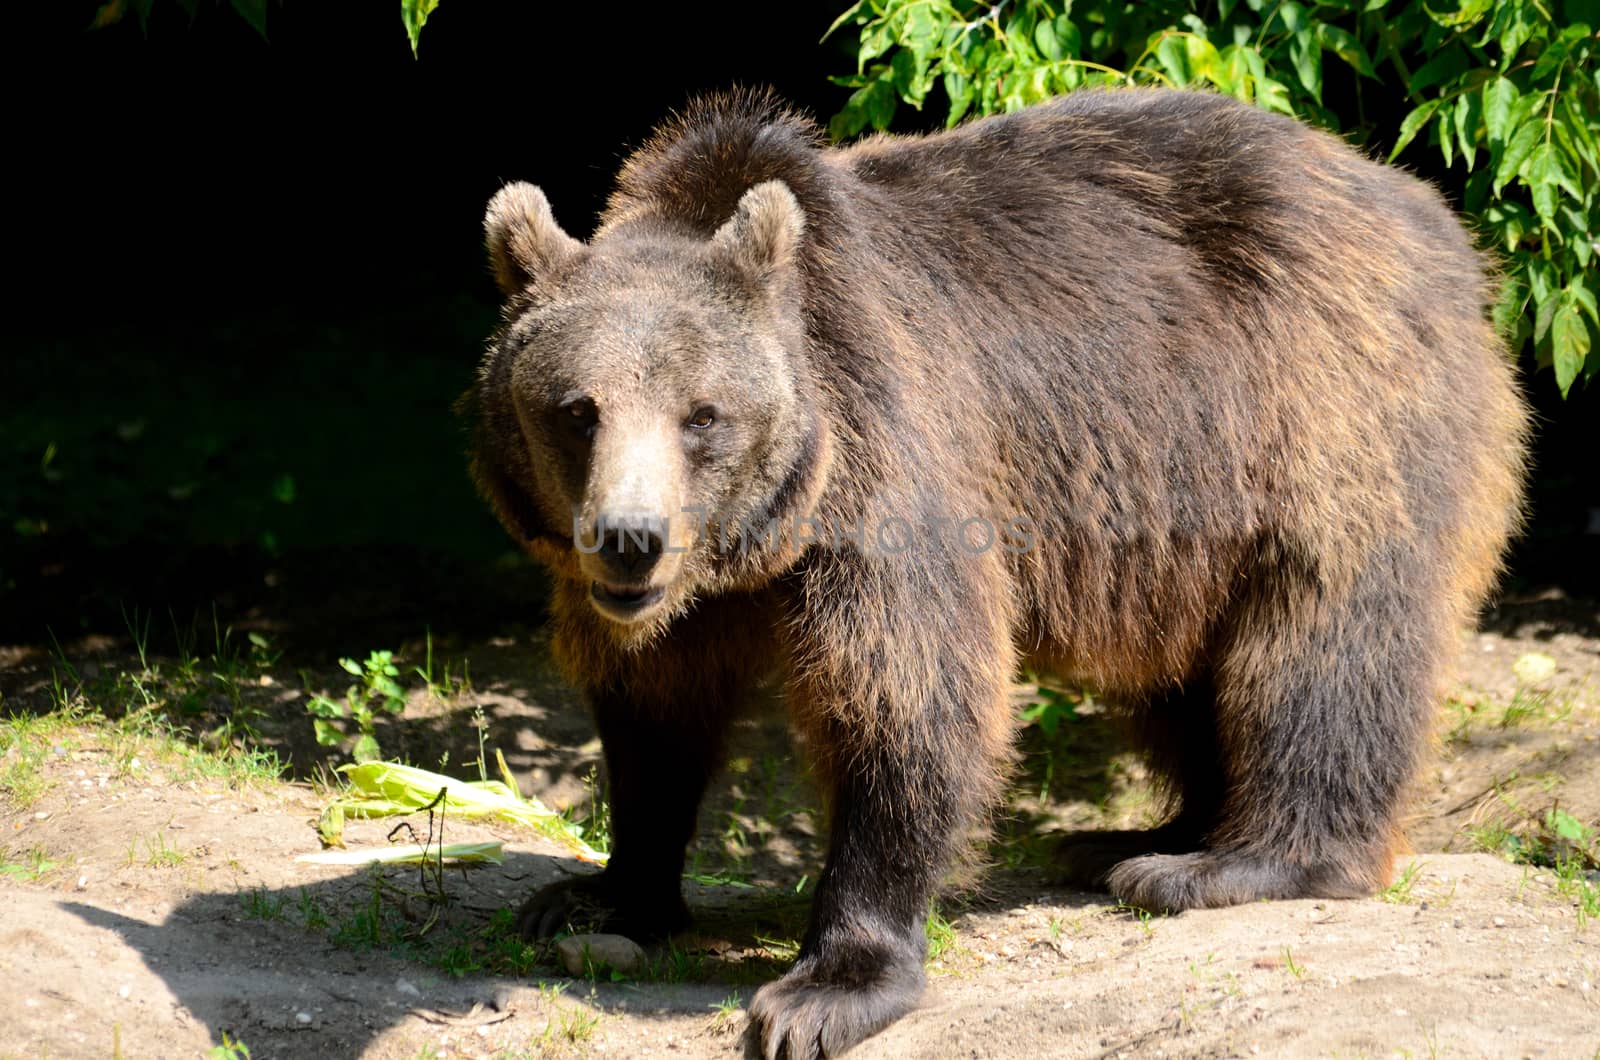 Single brown bear walks in Wroclaw's ZOO, Poland. No one can approach near this dangerous mammal.